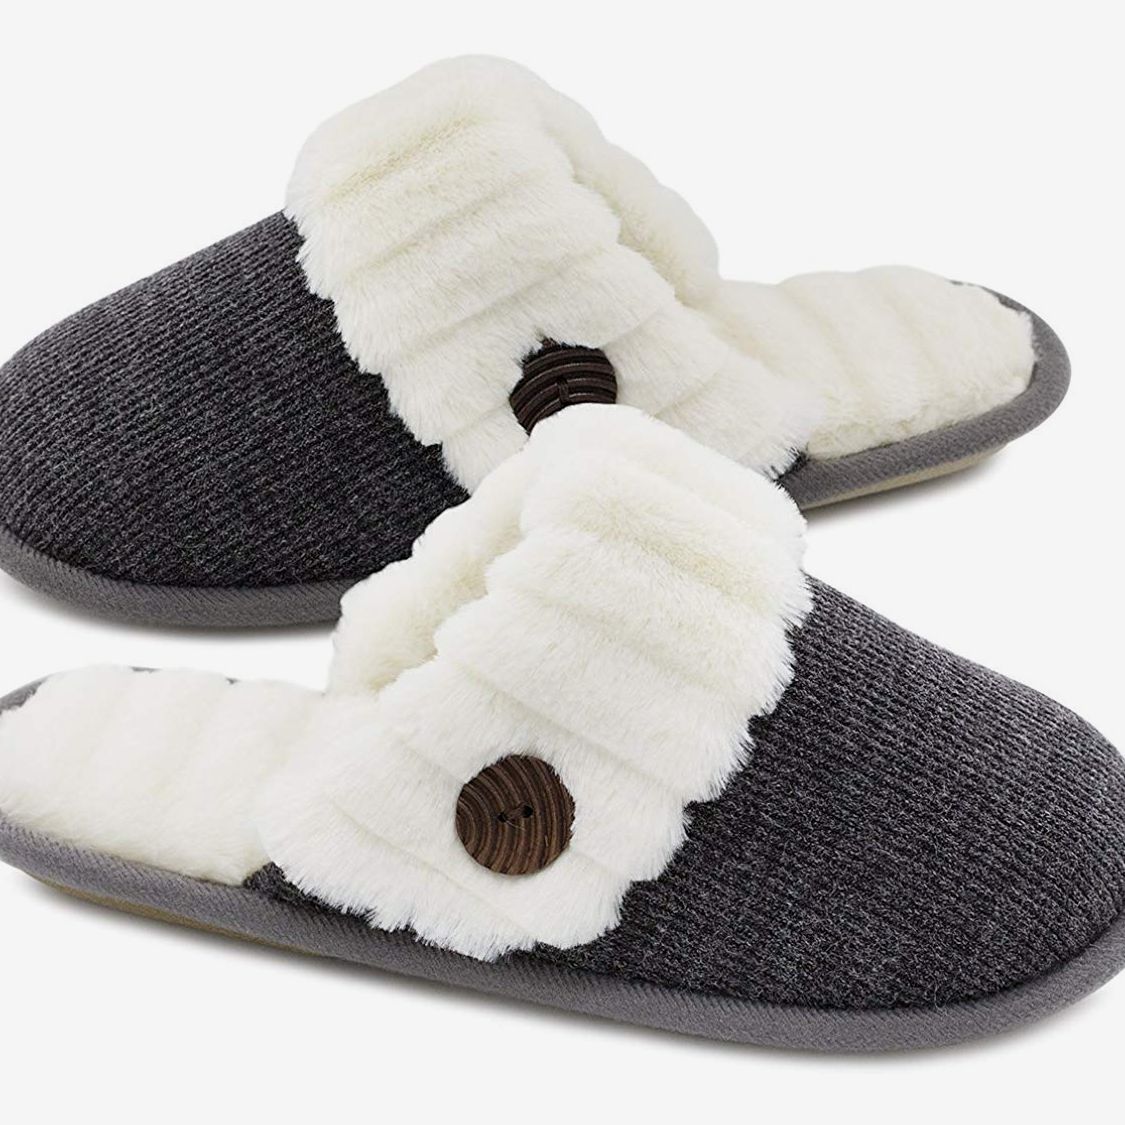 extra wide womens bedroom slippers